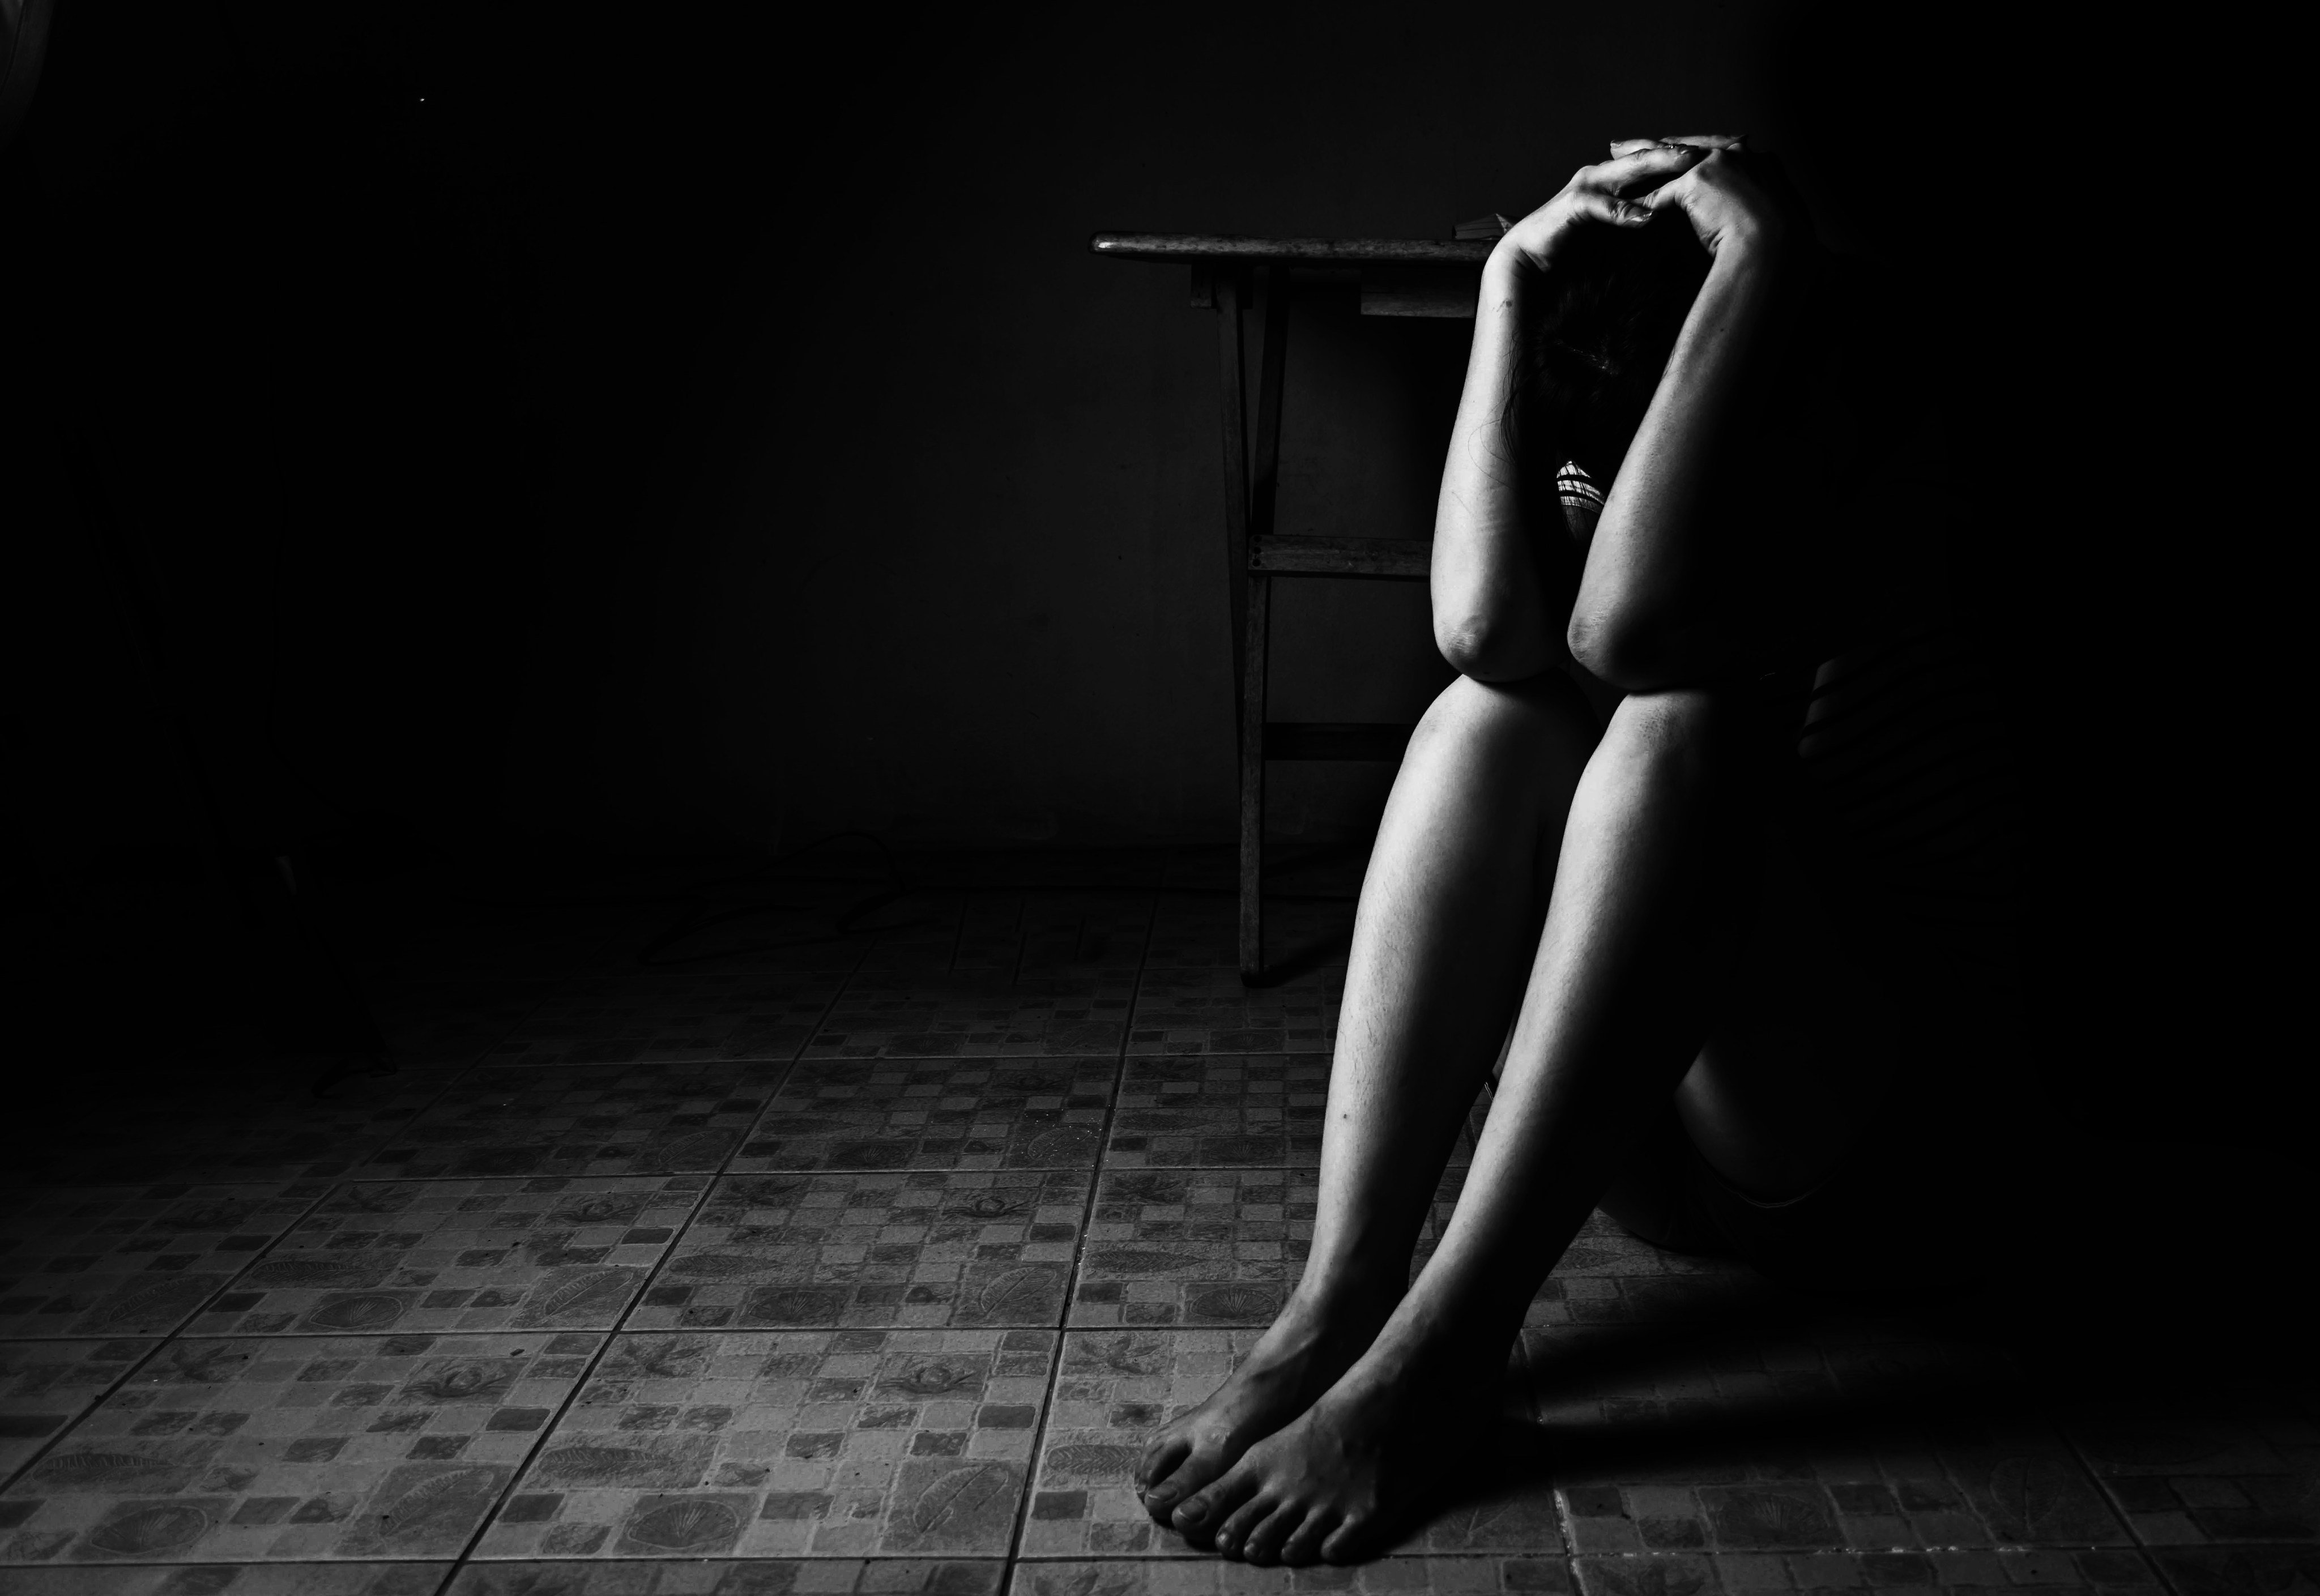 DBR Unique, a company in the Bihar city of Muzaffarpur in India, is alleged to have sexually exploited its workers. Photo: Shutterstock